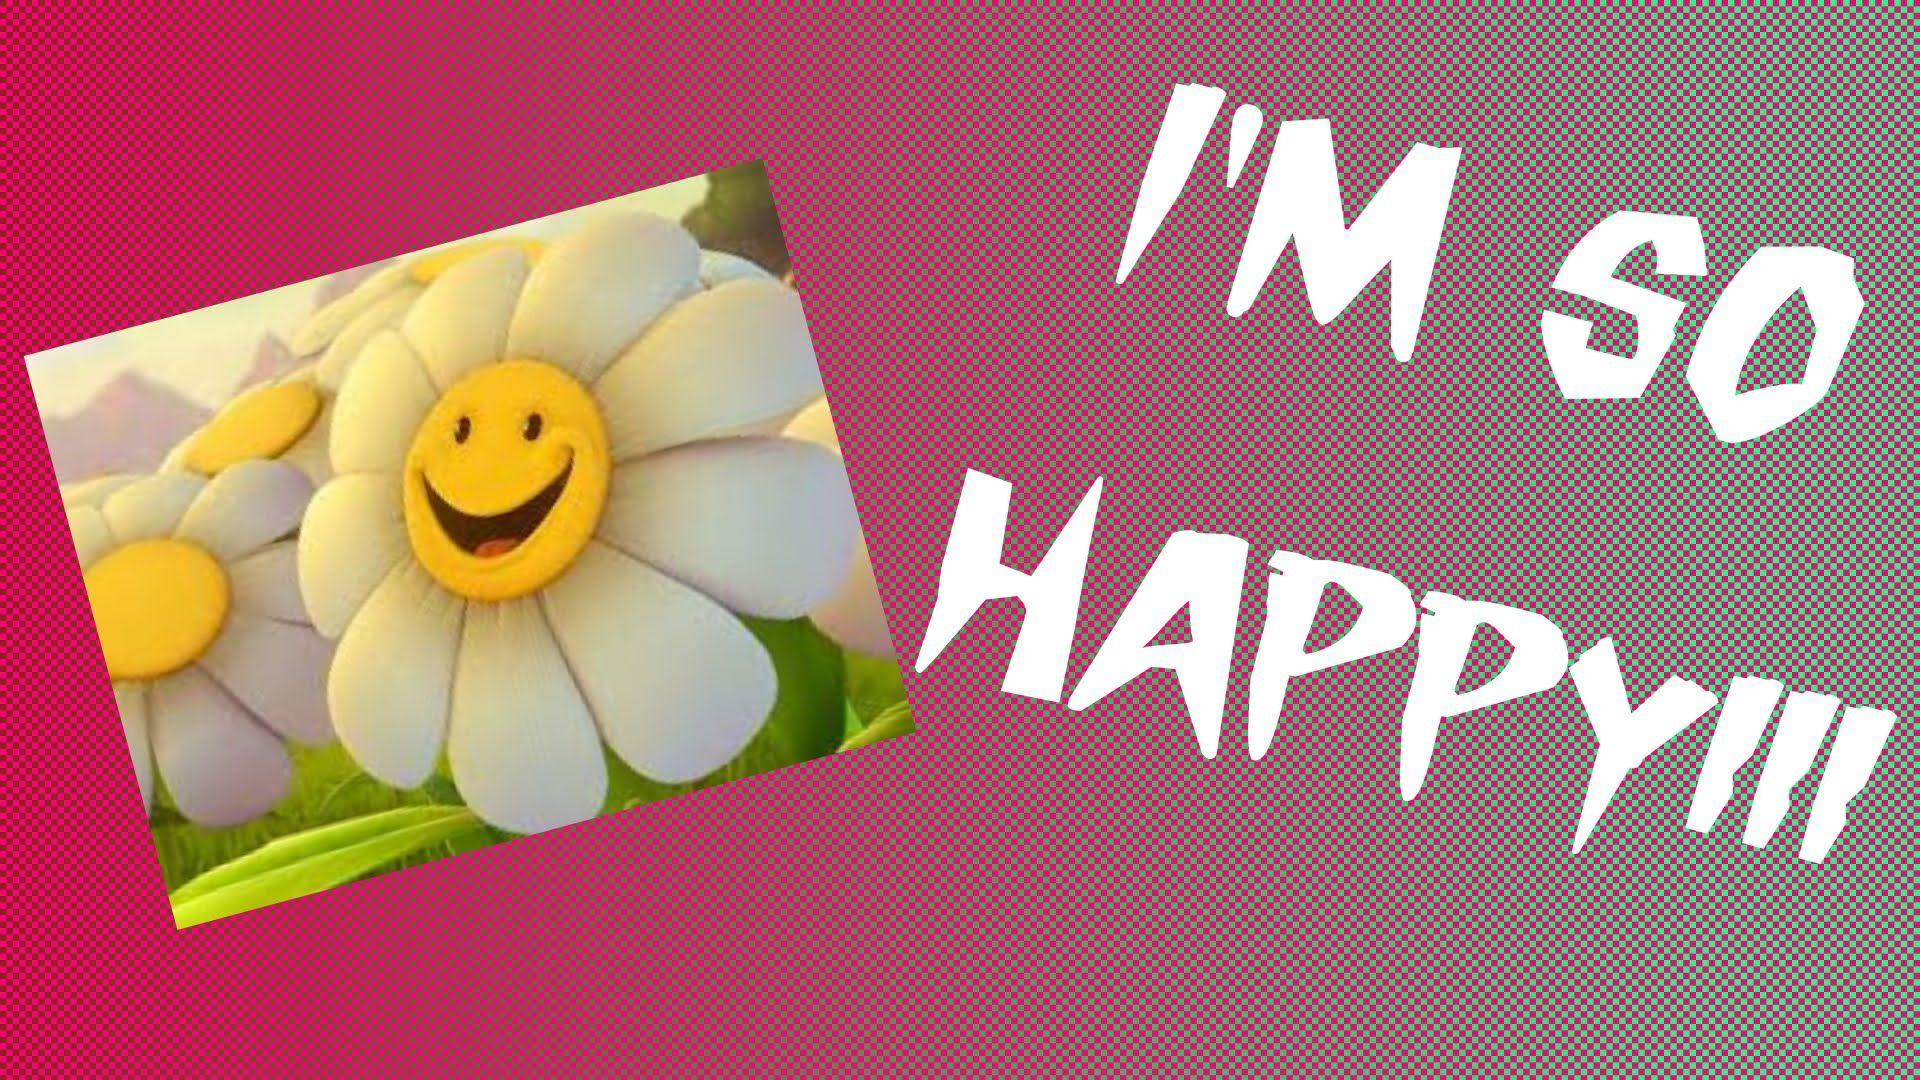 I M Happy Wallpapers Top Free I M Happy Backgrounds Wallpaperaccess